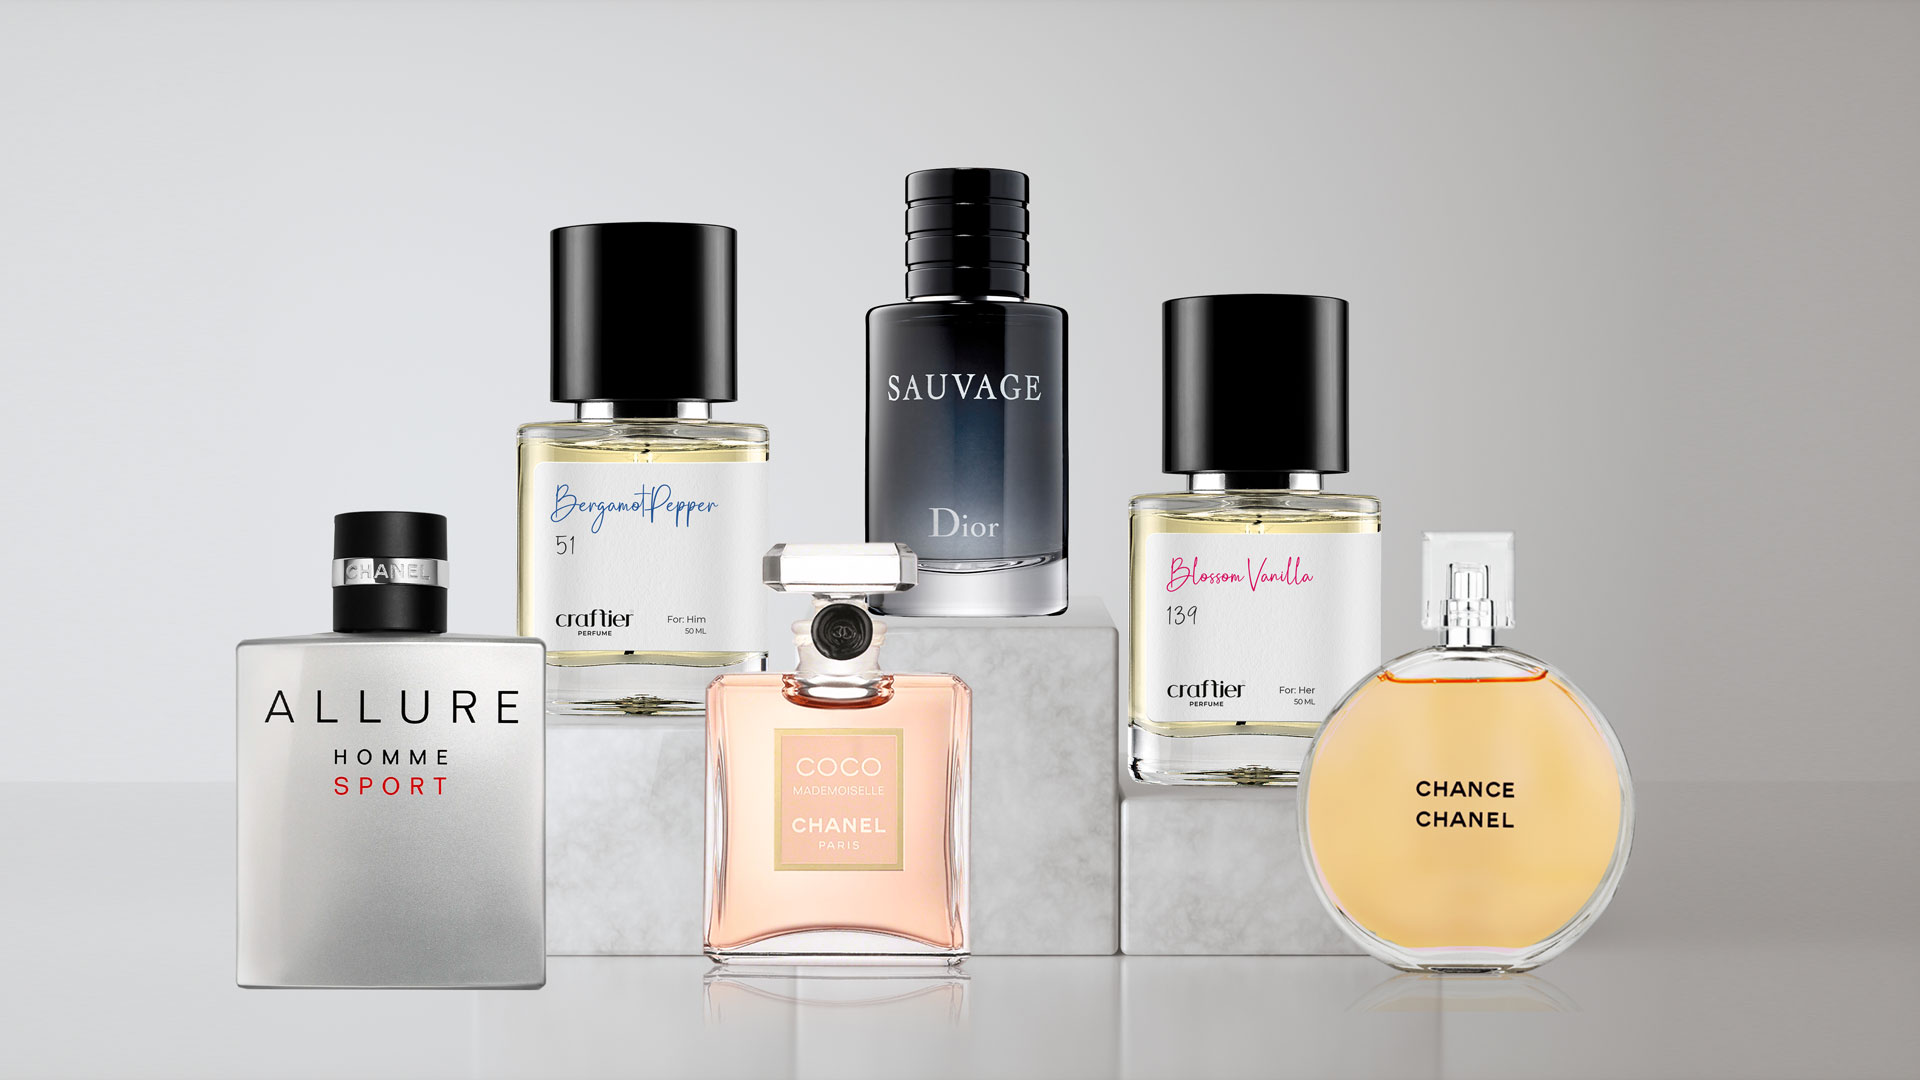 What Makes Dior Fragrances Stand Out from Other Brands?